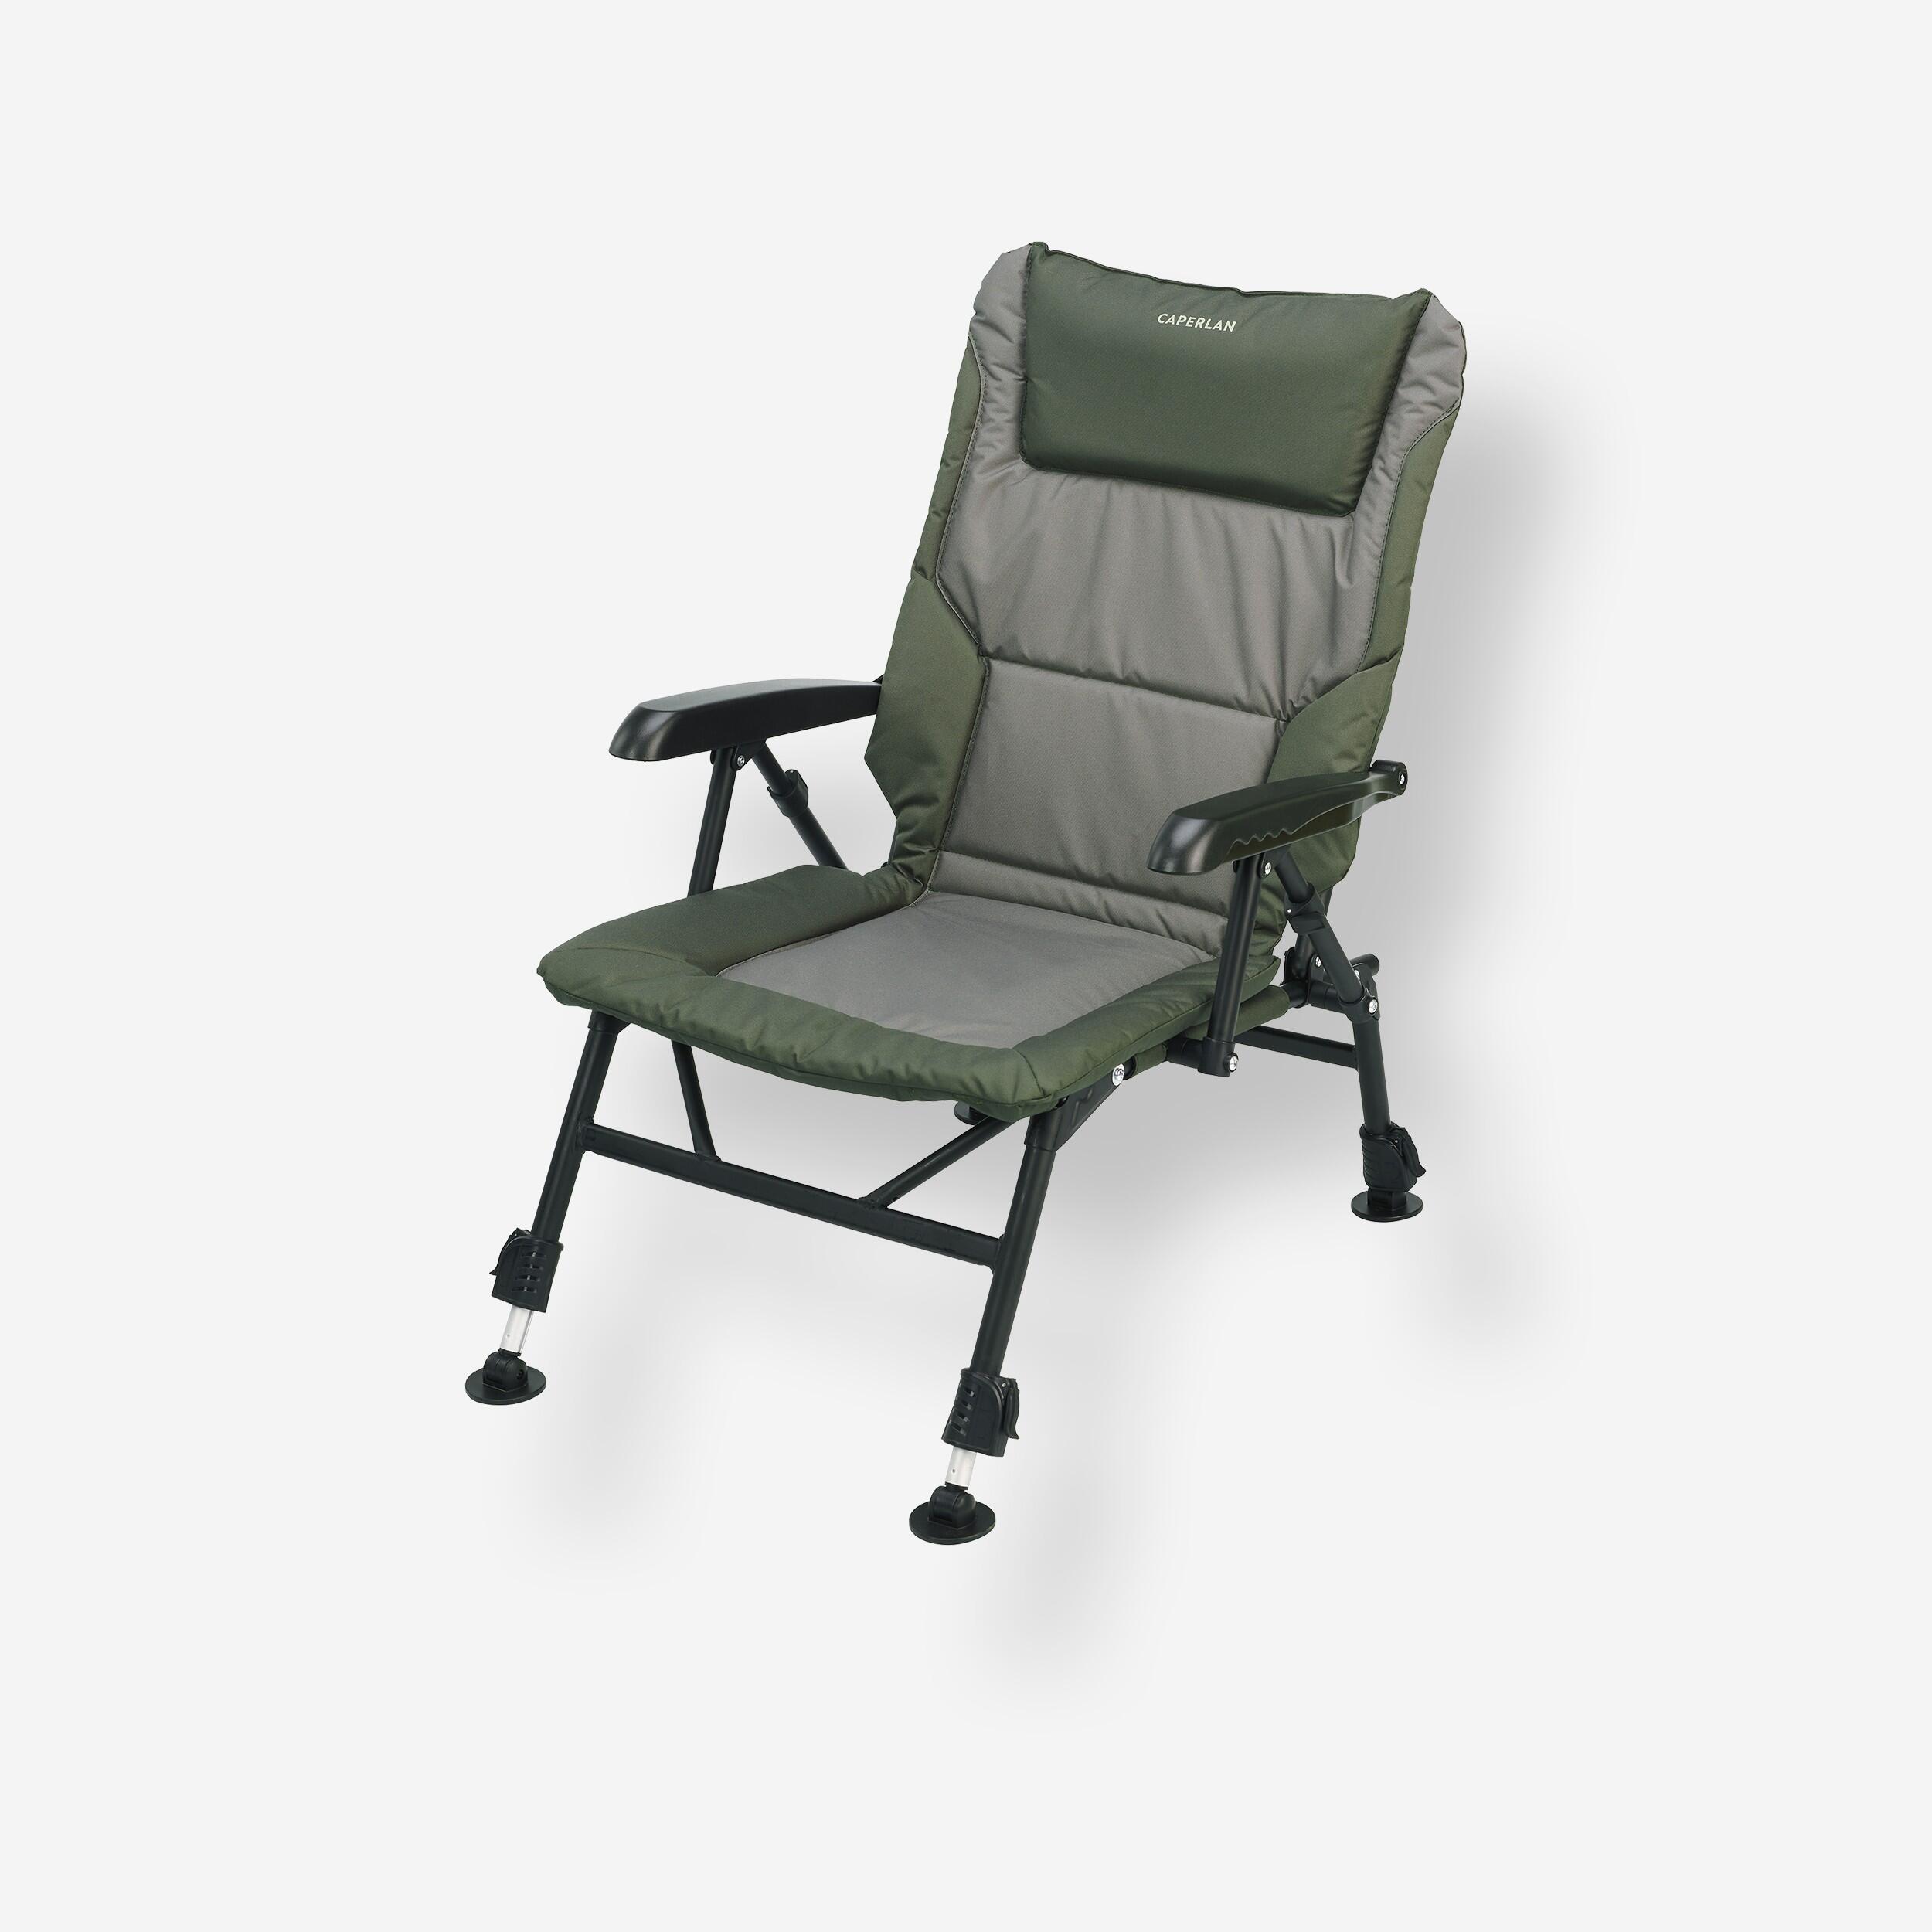 Camping Chairs Folding Chairs Decathlon